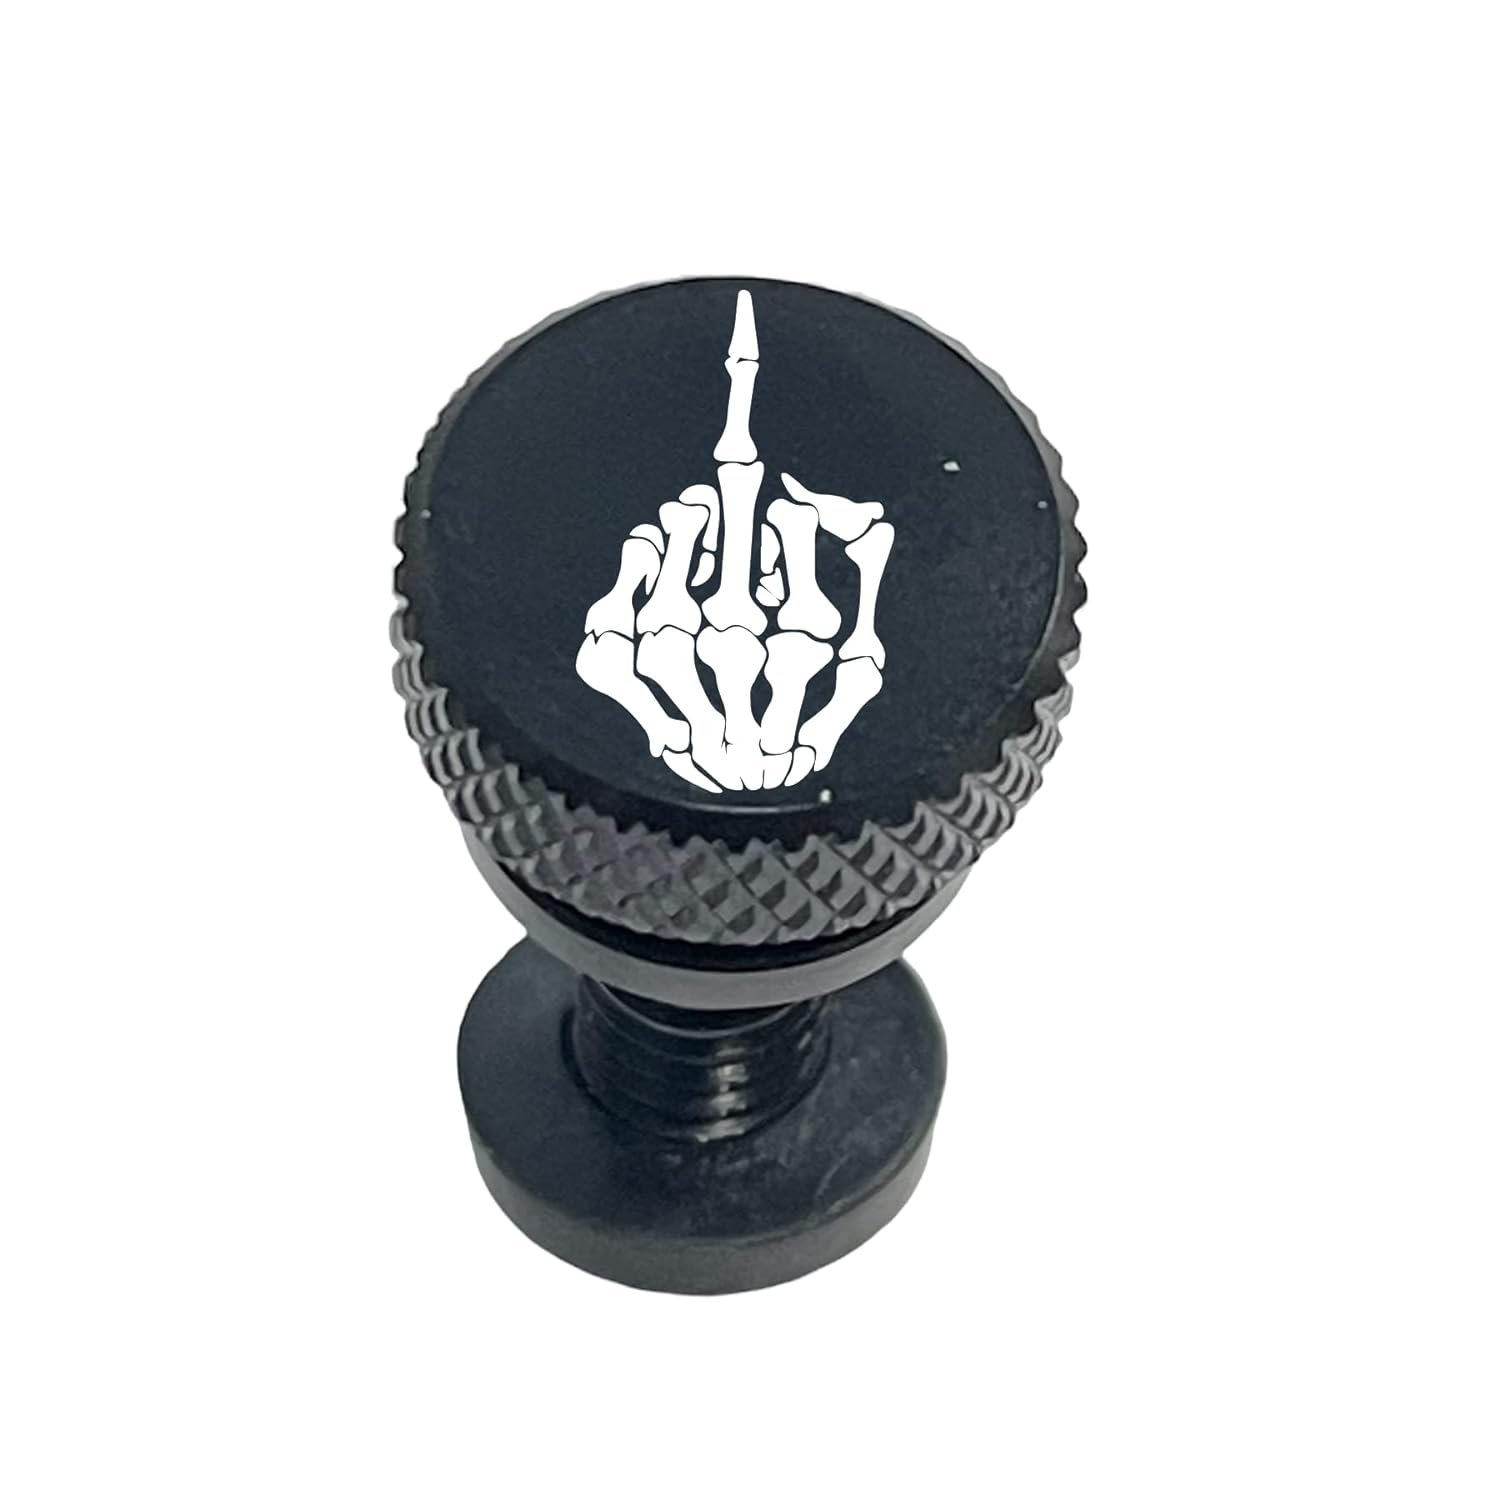 Flip Off Middle Finger Knurled Aluminum Rear 1/4-20 Seat Bolt Fits Harley Davidson 1996-2023+. Custom Made in the USA! (Black Bolt) - Flip Off Middle Finger Knurled Aluminum Rear Seat Bolt Review